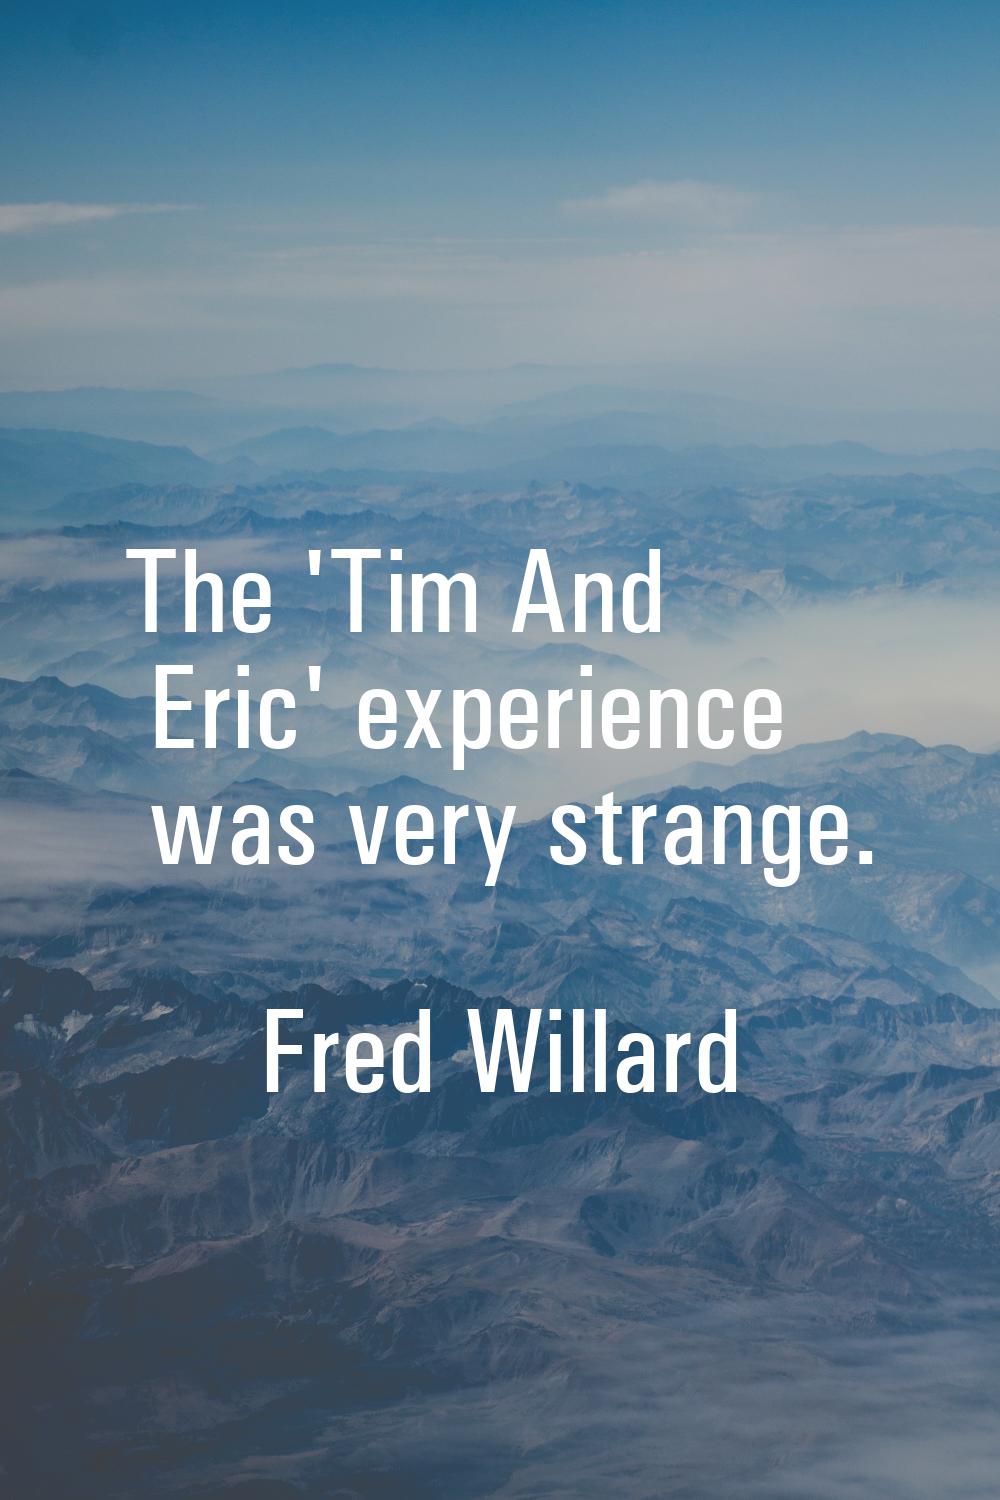 The 'Tim And Eric' experience was very strange.